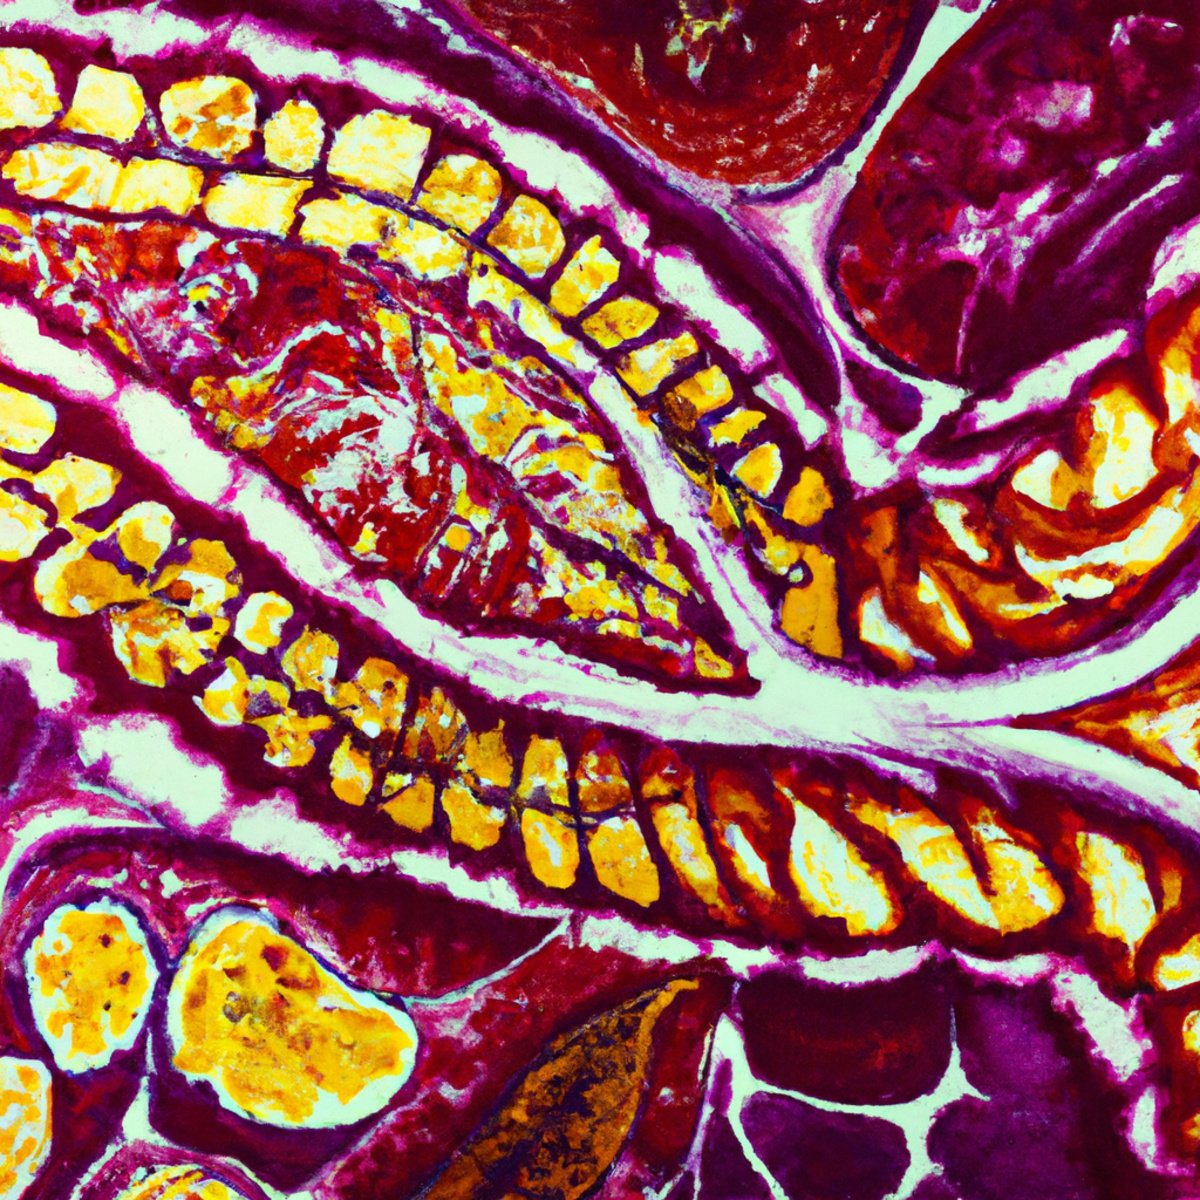 Close-up of healthy pancreas, showcasing intricate network of ducts and blood vessels, highlighting normal functionality.